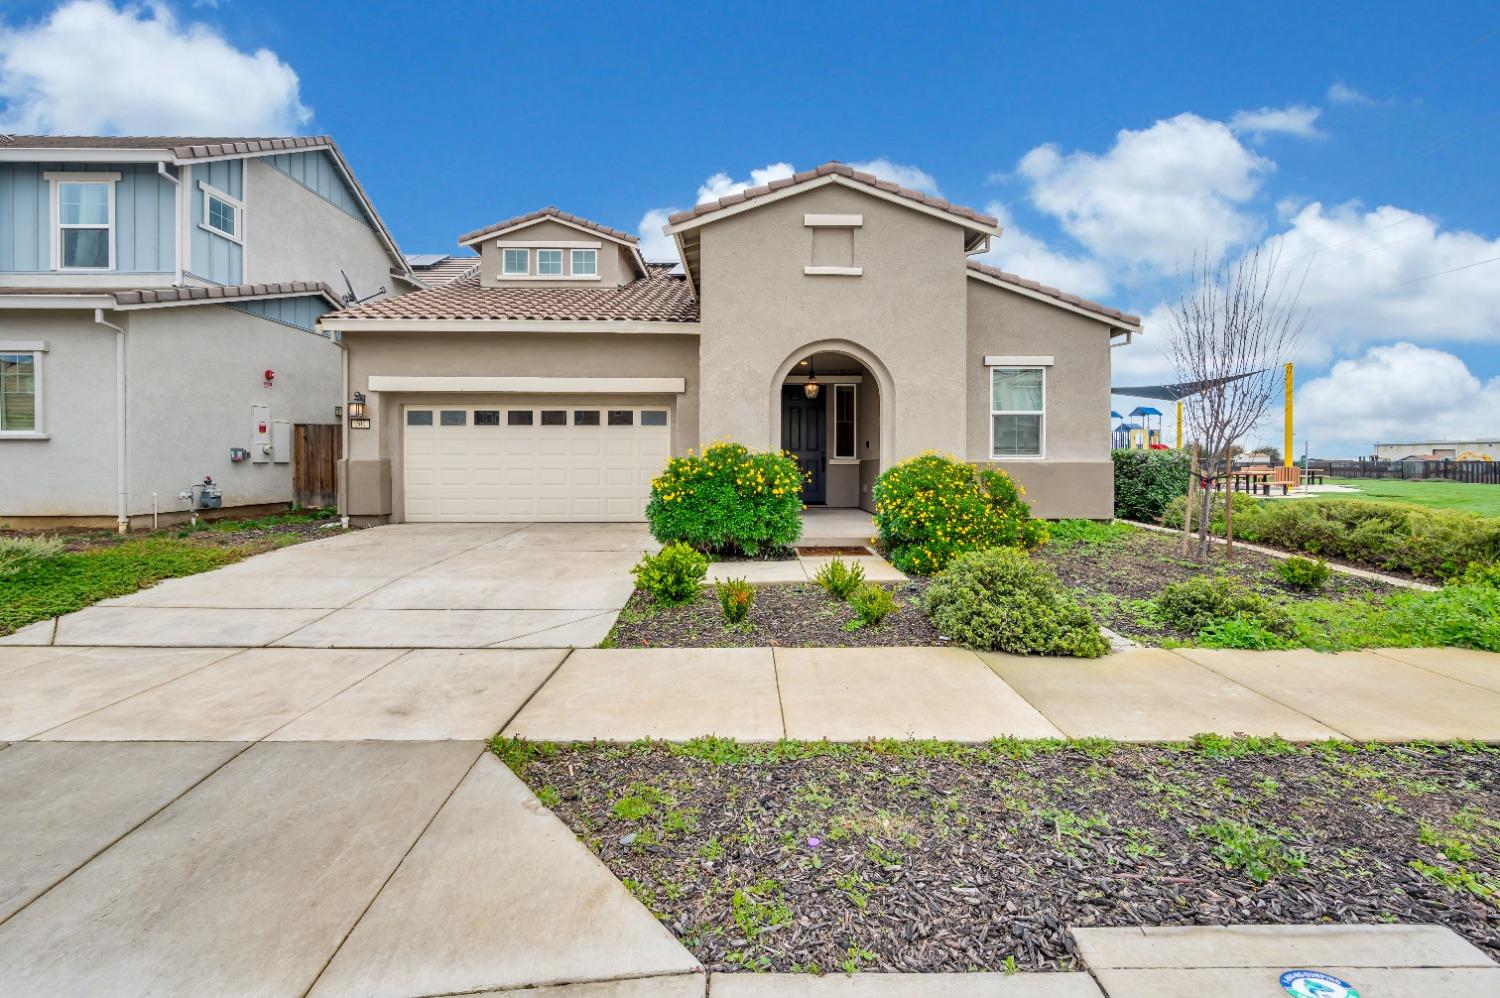 Photo of 500 Tintori Ct in Brentwood, CA